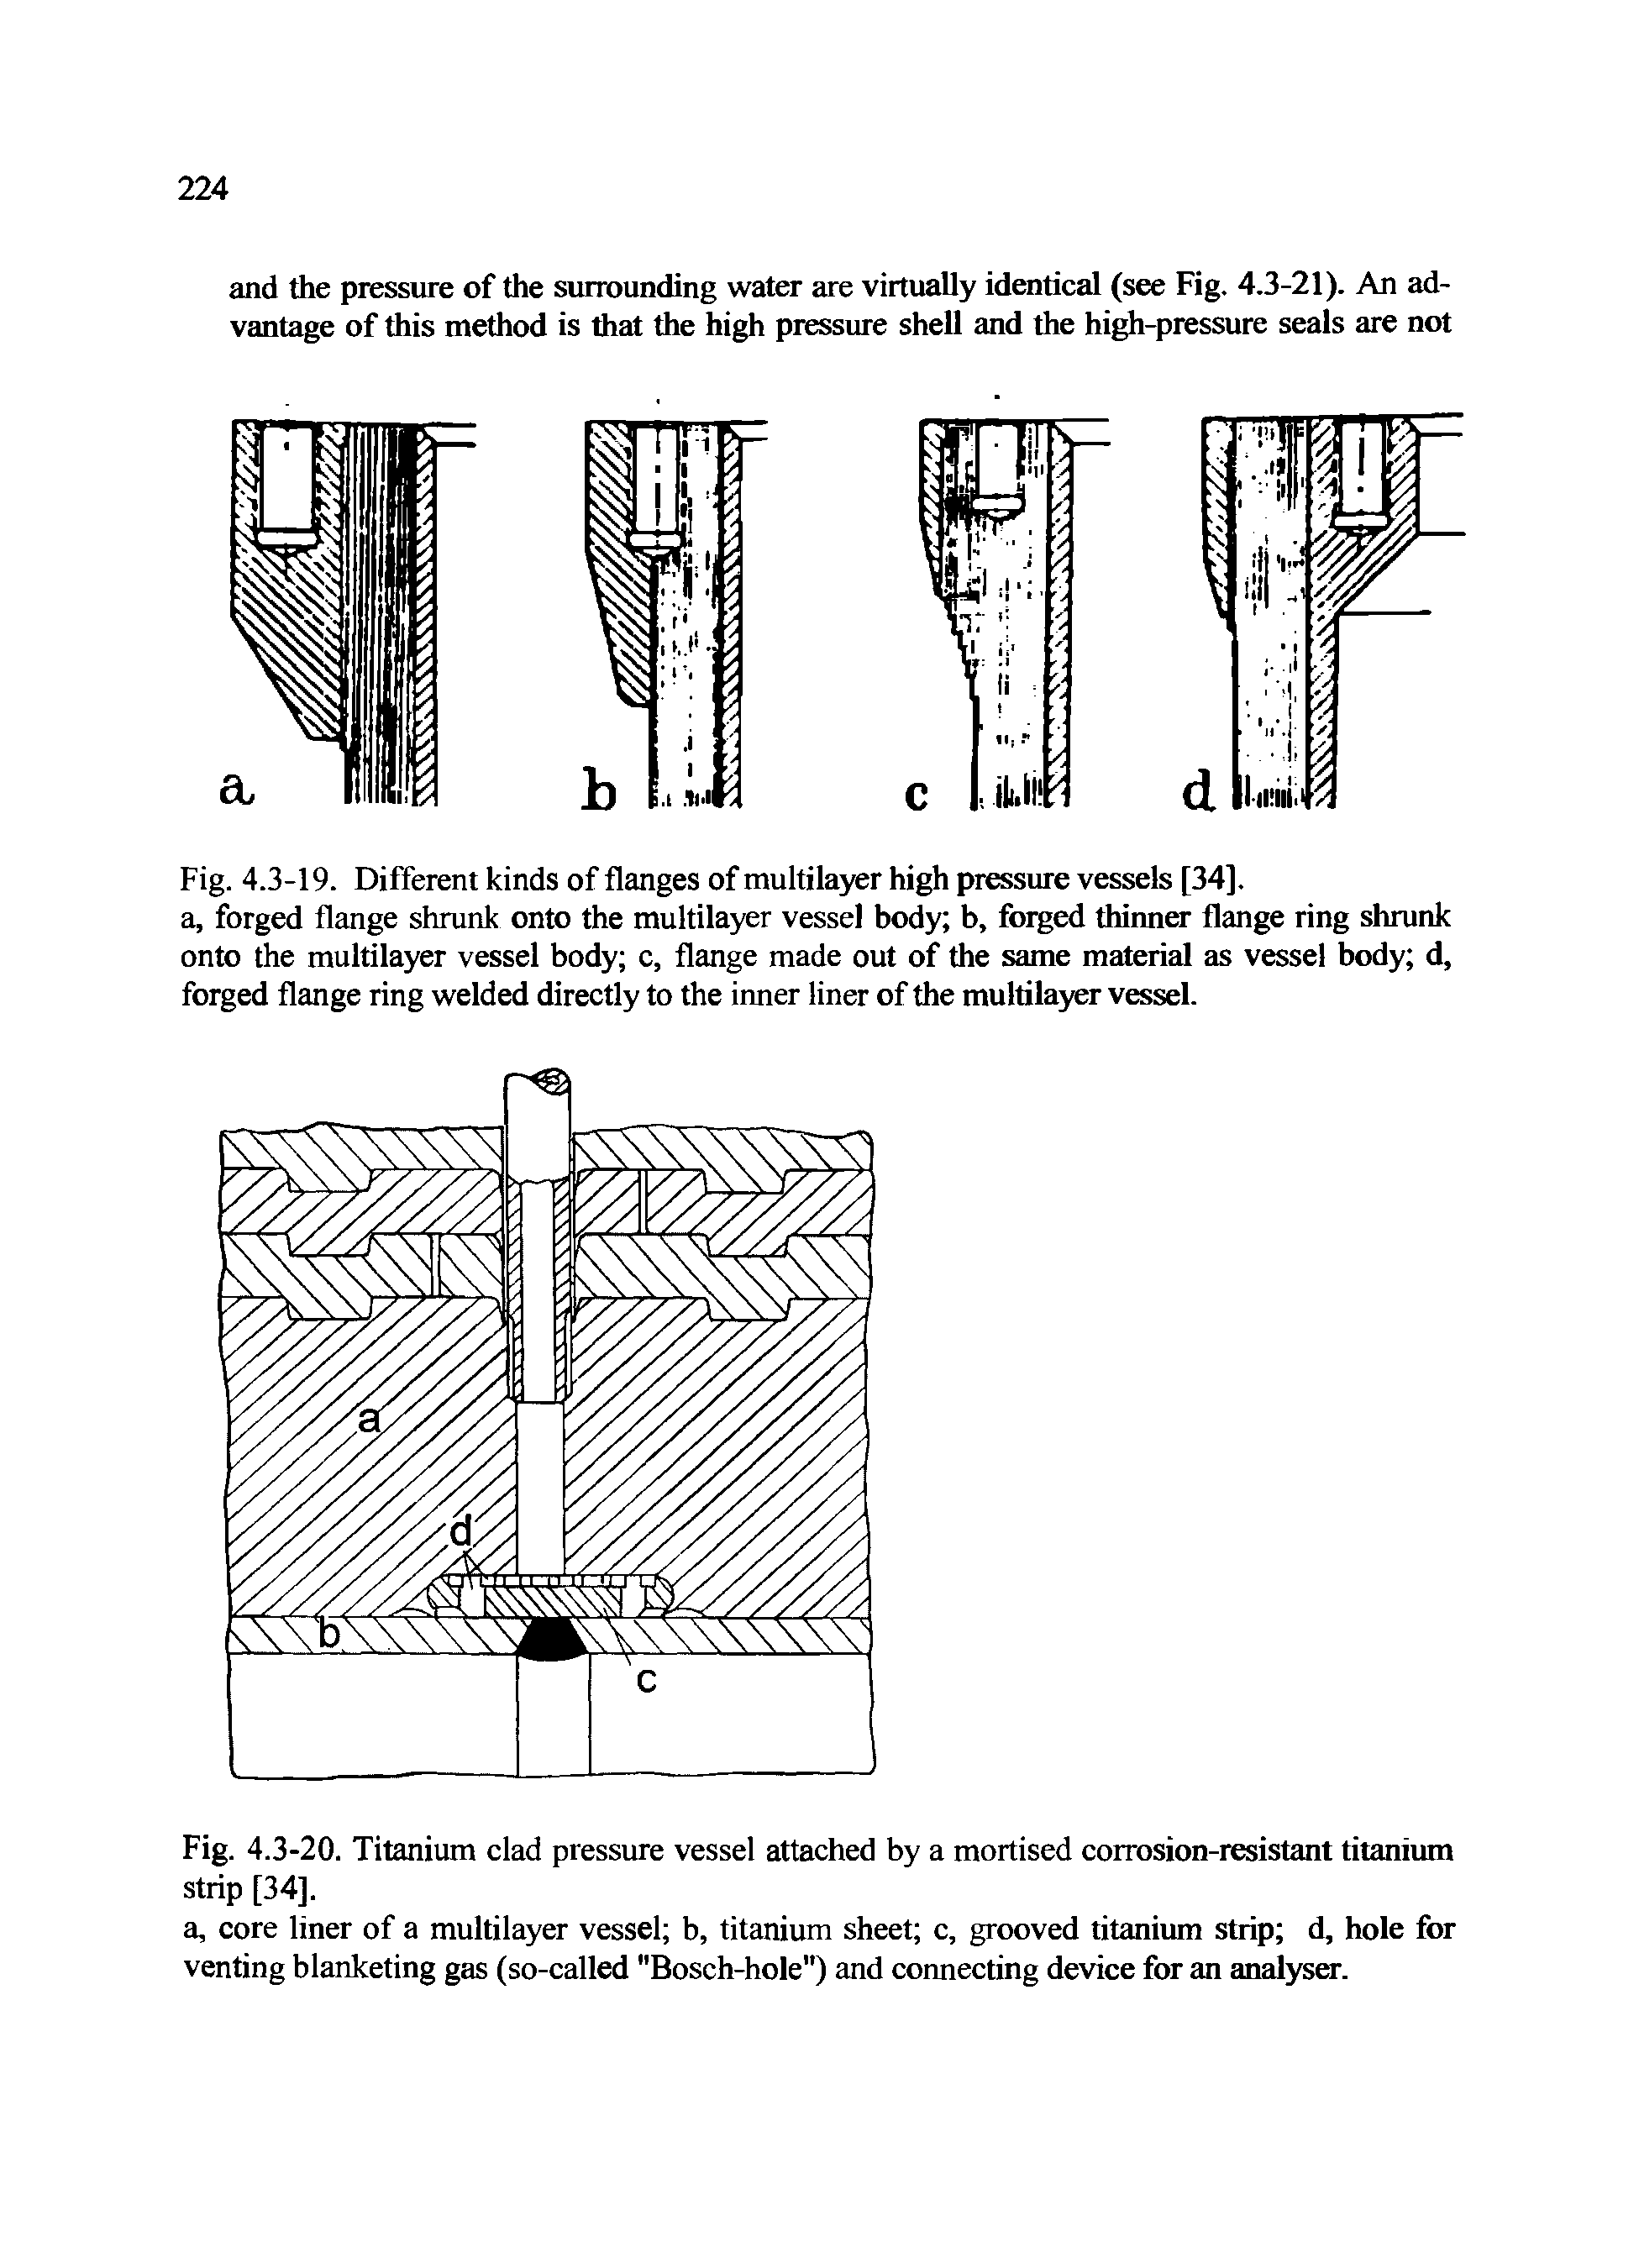 Fig. 4.3-19. Different kinds of flanges of multilayer high pressure vessels [34]. a, forged flange shrunk onto the multilayer vessel body b, forged thinner flange ring shrunk onto the multilayer vessel body c, flange made out of the same material as vessel body d, forged flange ring welded directly to the inner liner of the multilayer vessel.